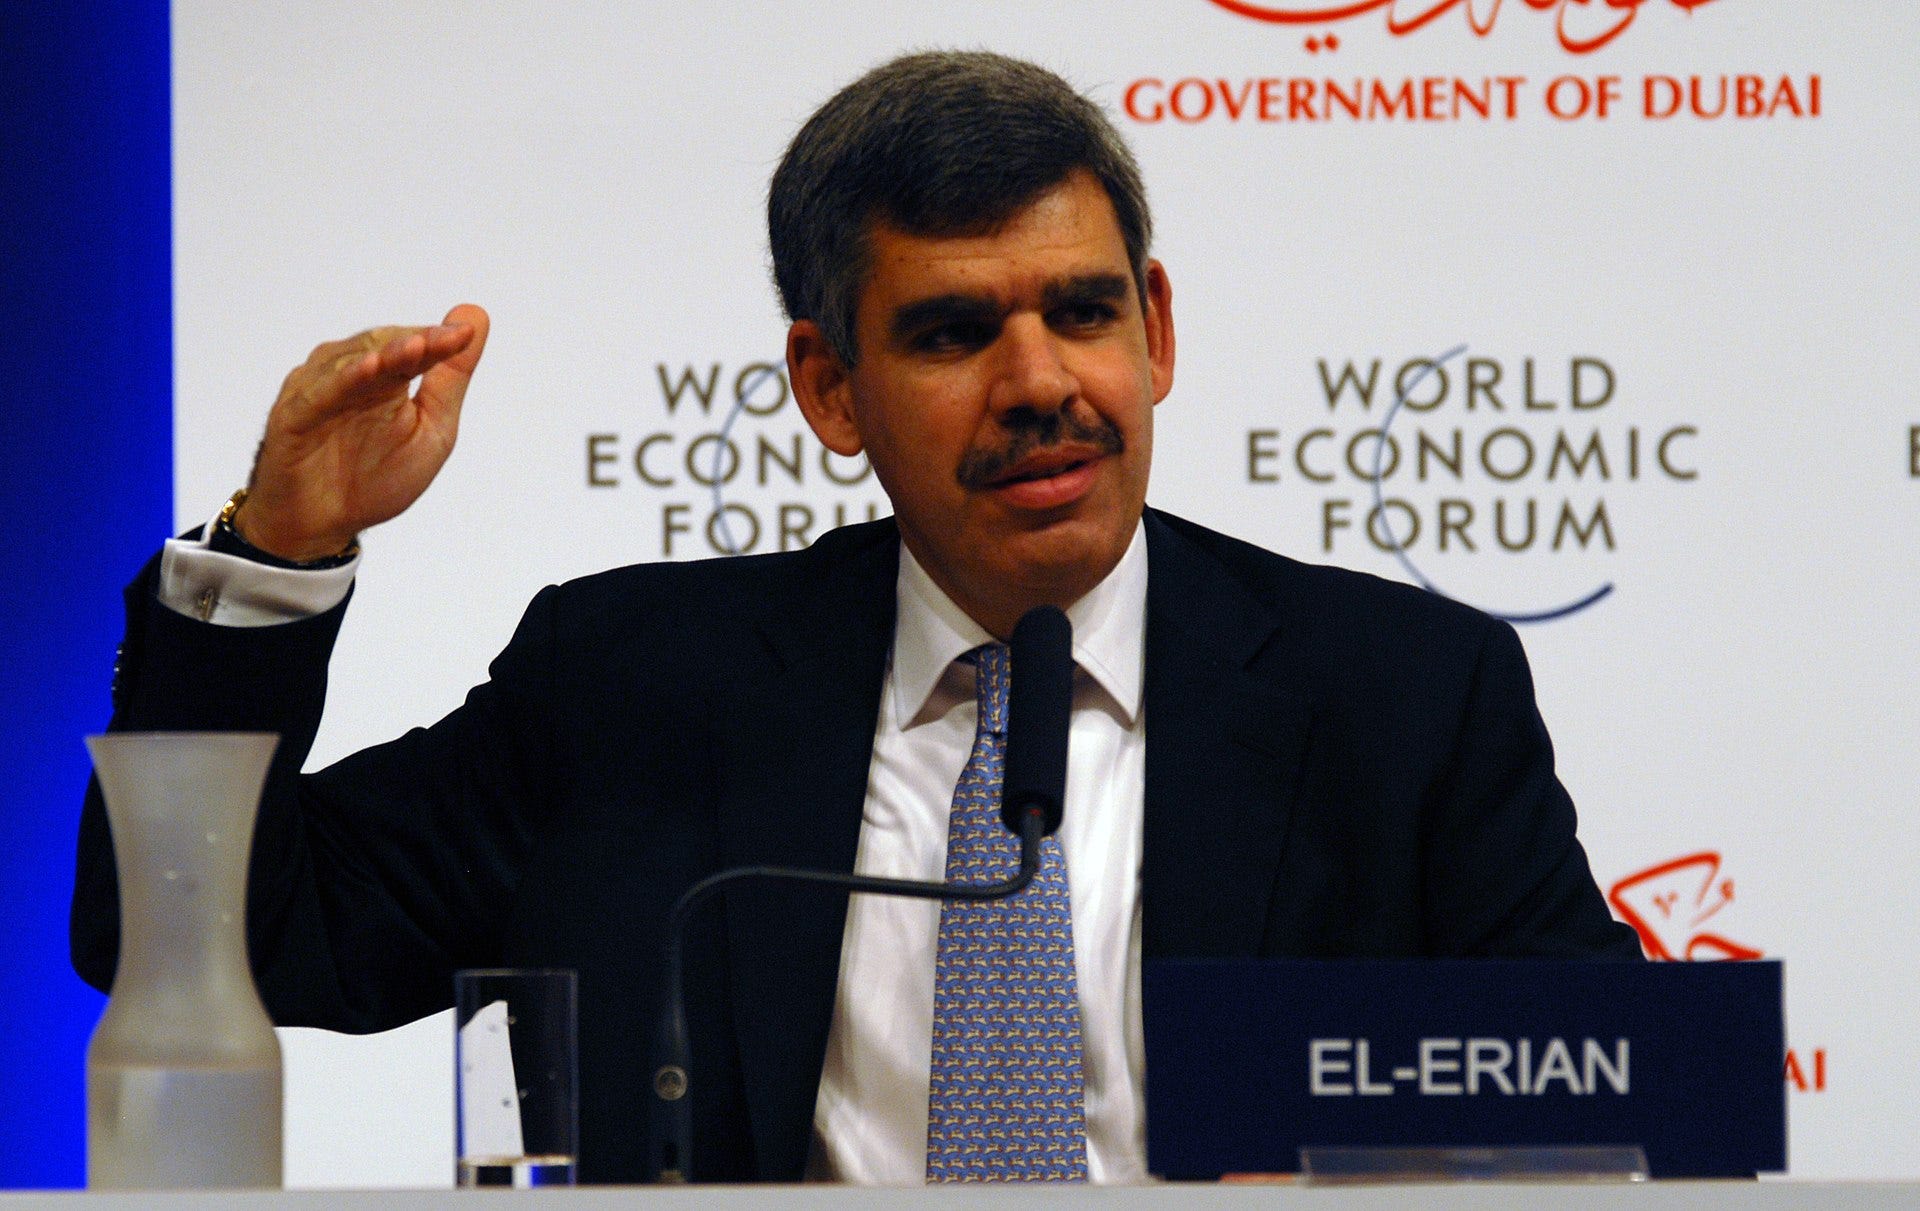 Top Economist El-Erian Urges Caution Over 'Short And Shallow' Recession Consensus Call: Plan For 'Range Of Possible Outcomes'